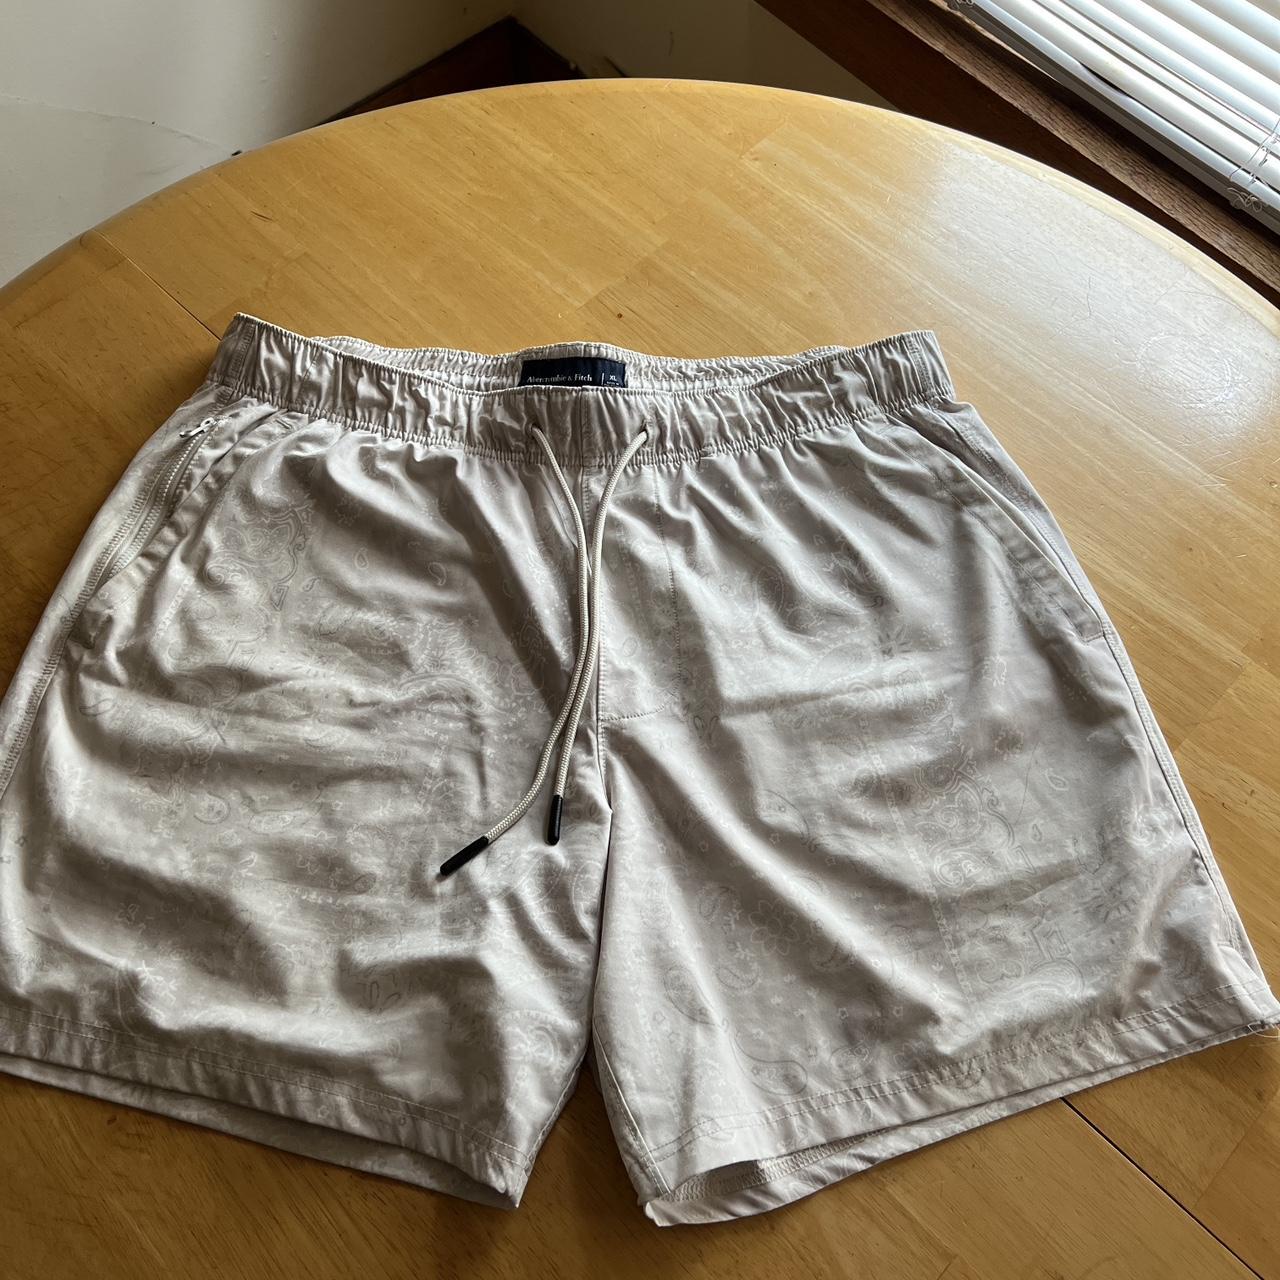 Abercrombie & Fitch Men's White and Cream Shorts | Depop